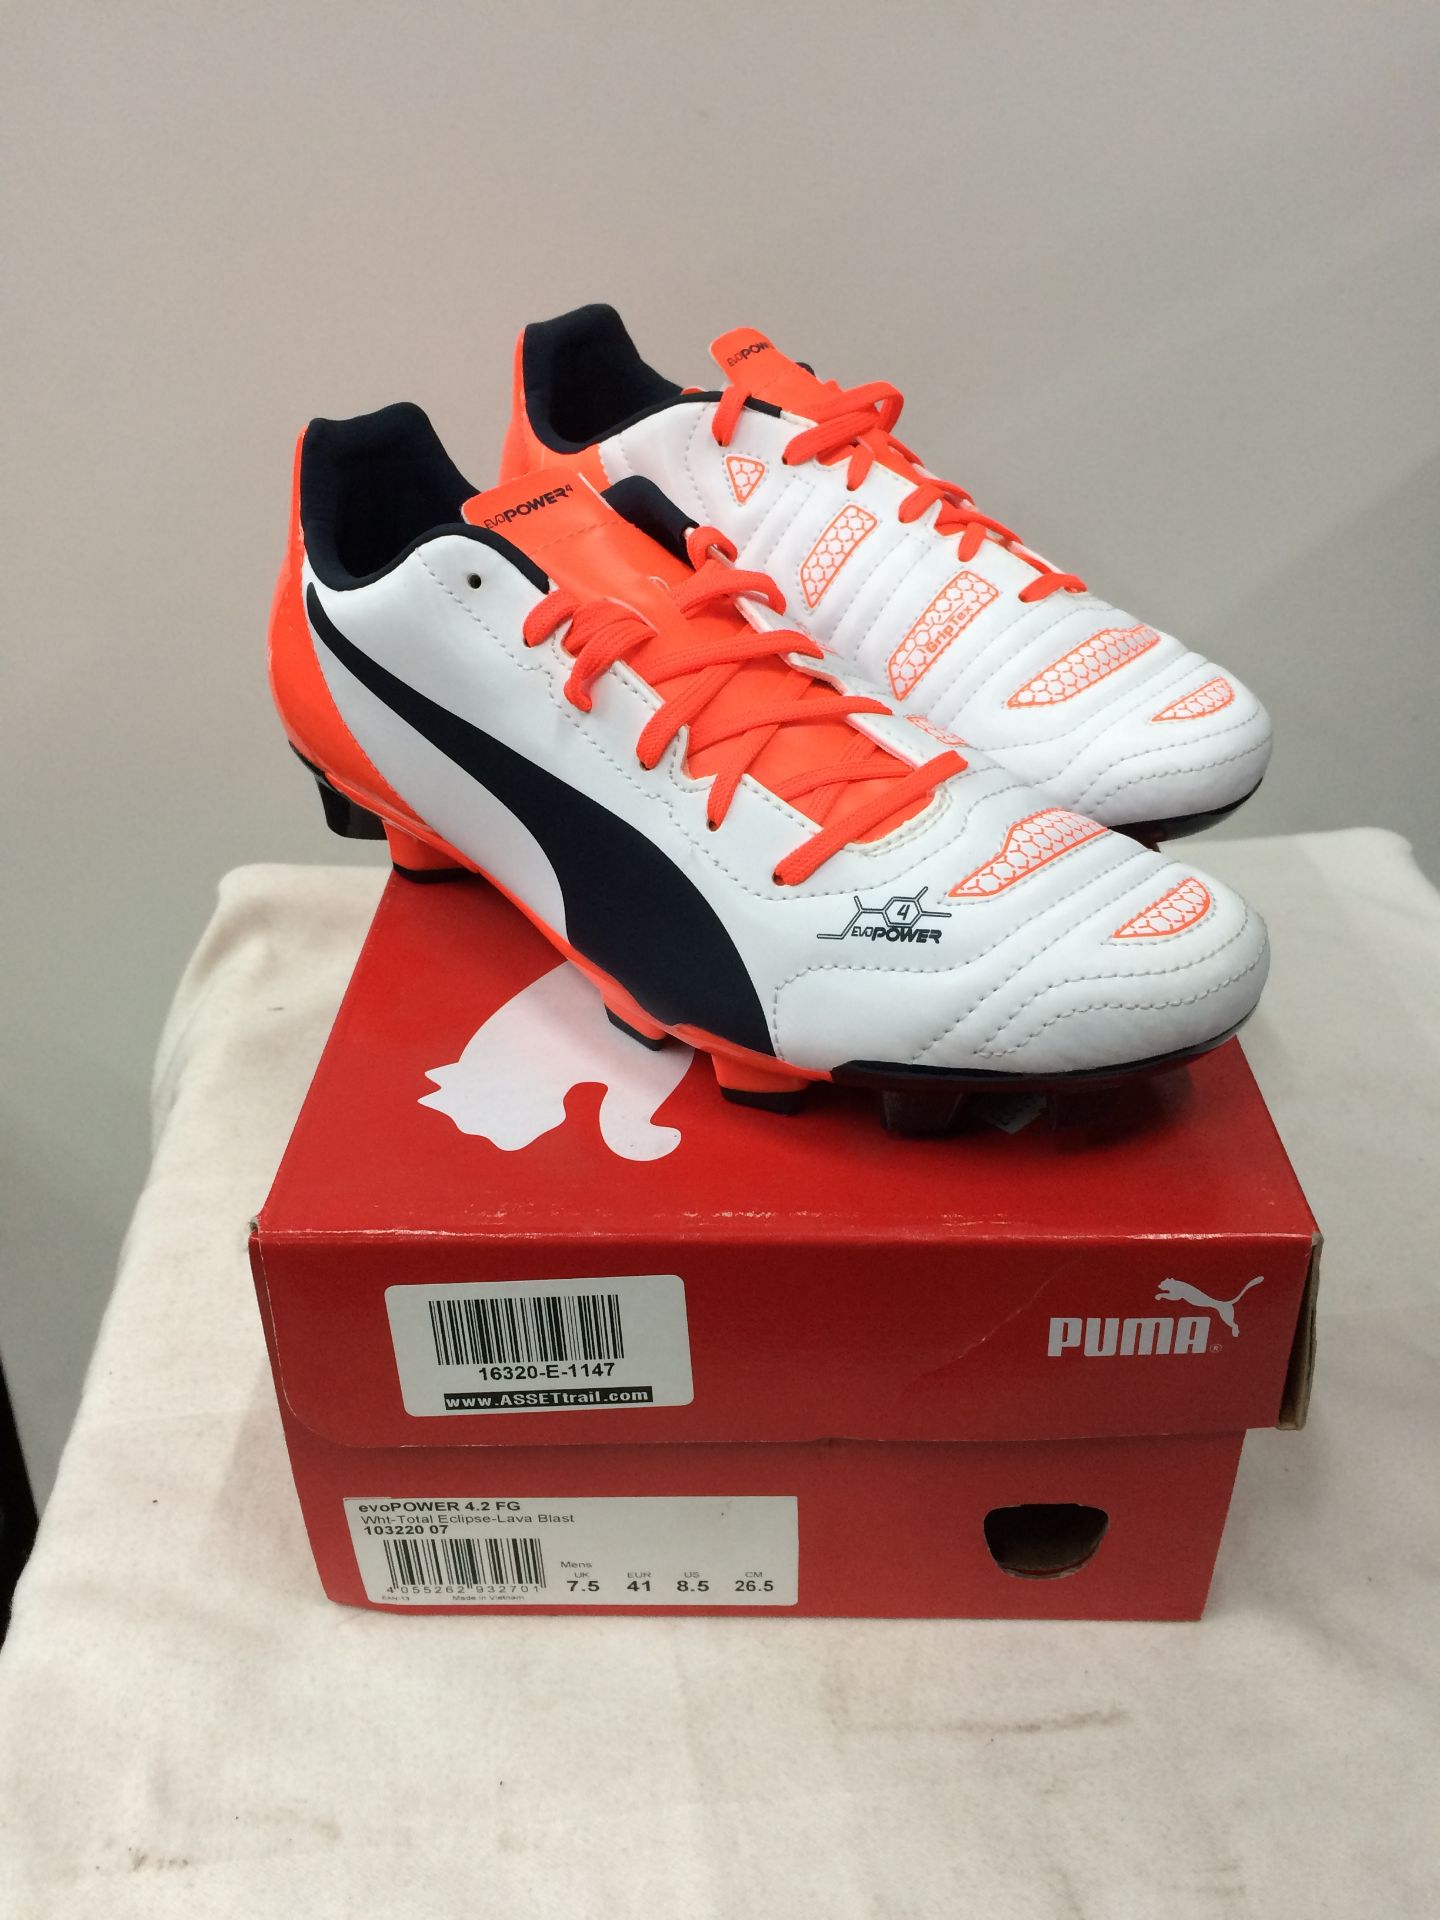 4 X Pairs of Puma Evo Power Football Boots in various sizes and styles - Image 2 of 2